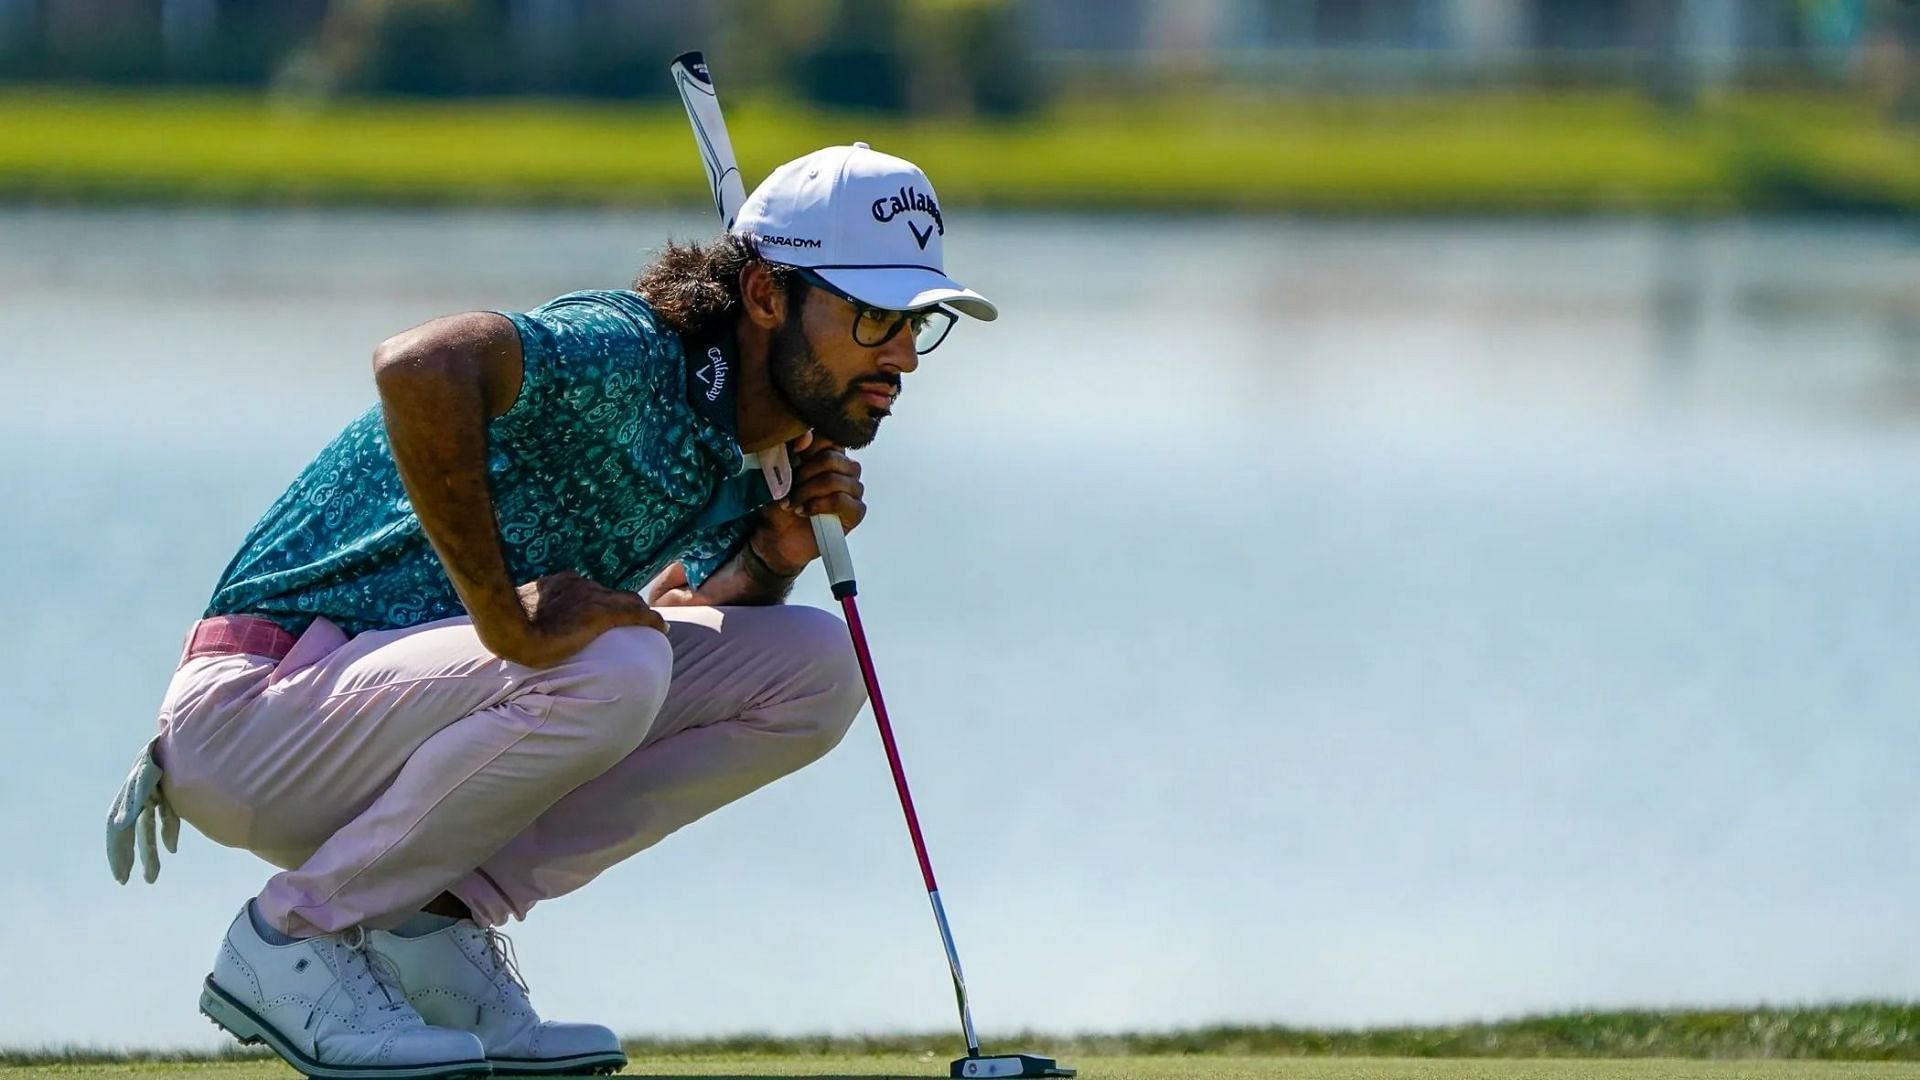 Aksahy Bhatia ended as a runner up at 2023 Puerto Rico Open, his best finish of his PGA Tour career